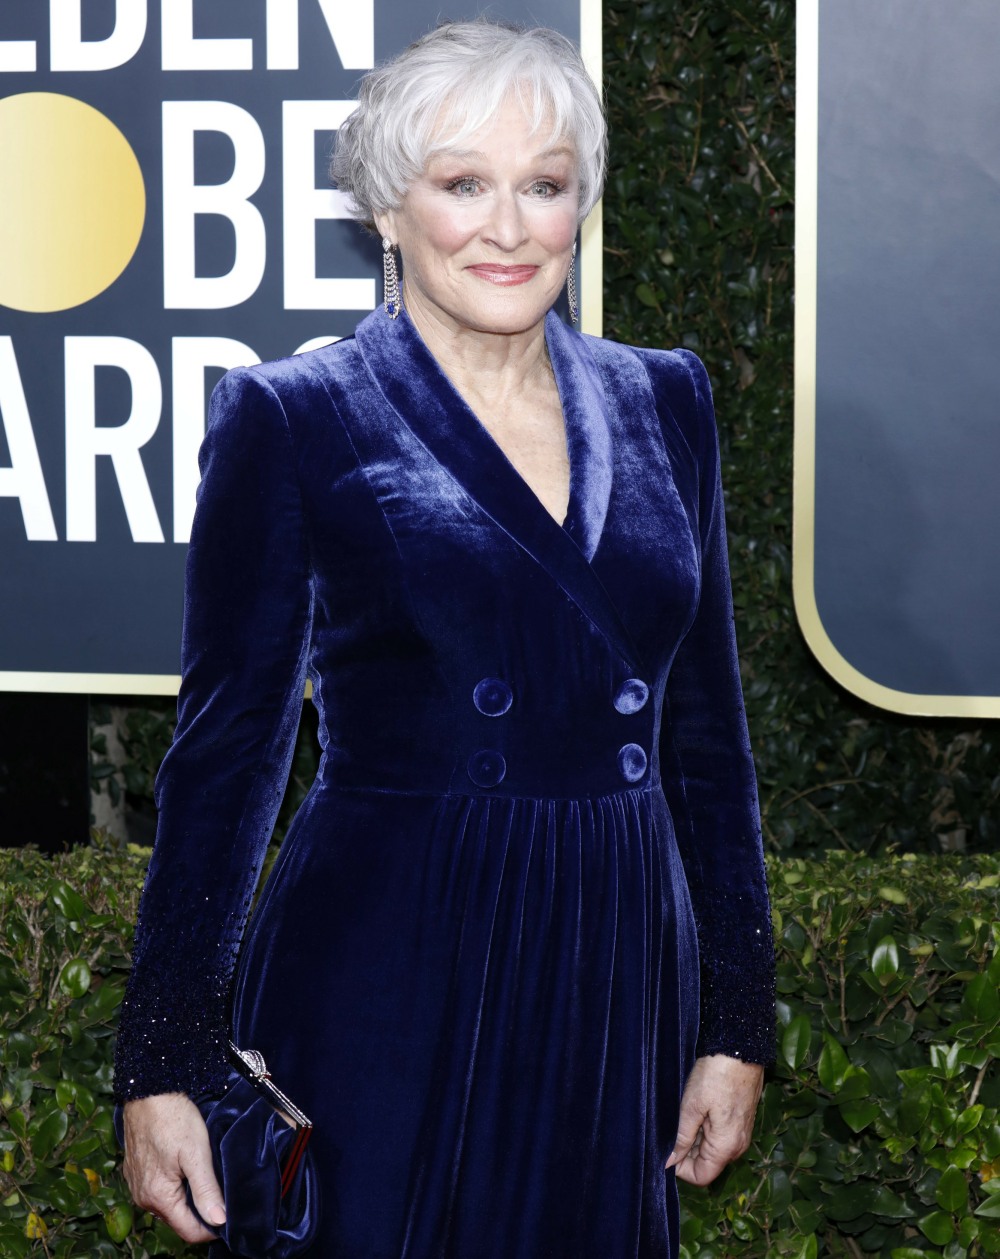 Glenn Close attending the 77th Annual Golden Globe Awards at The Beverly Hilton Hotel on January 5, 2020 in Beverly Hills, California. | usage worldwide